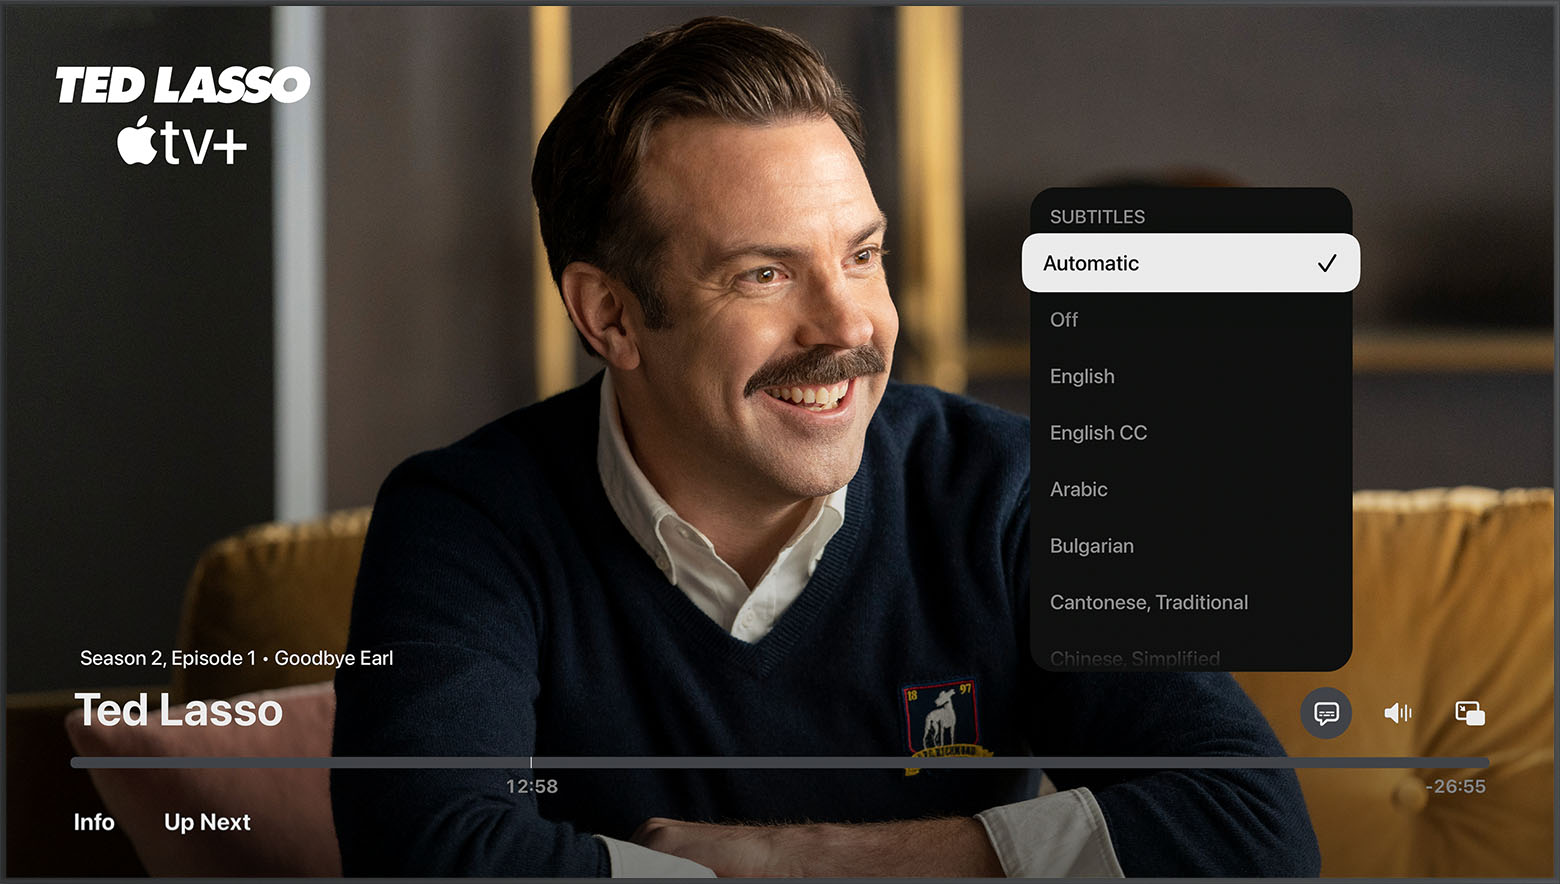 Subtitle options in the Apple TV app on Apple TV, smart TV and streaming device